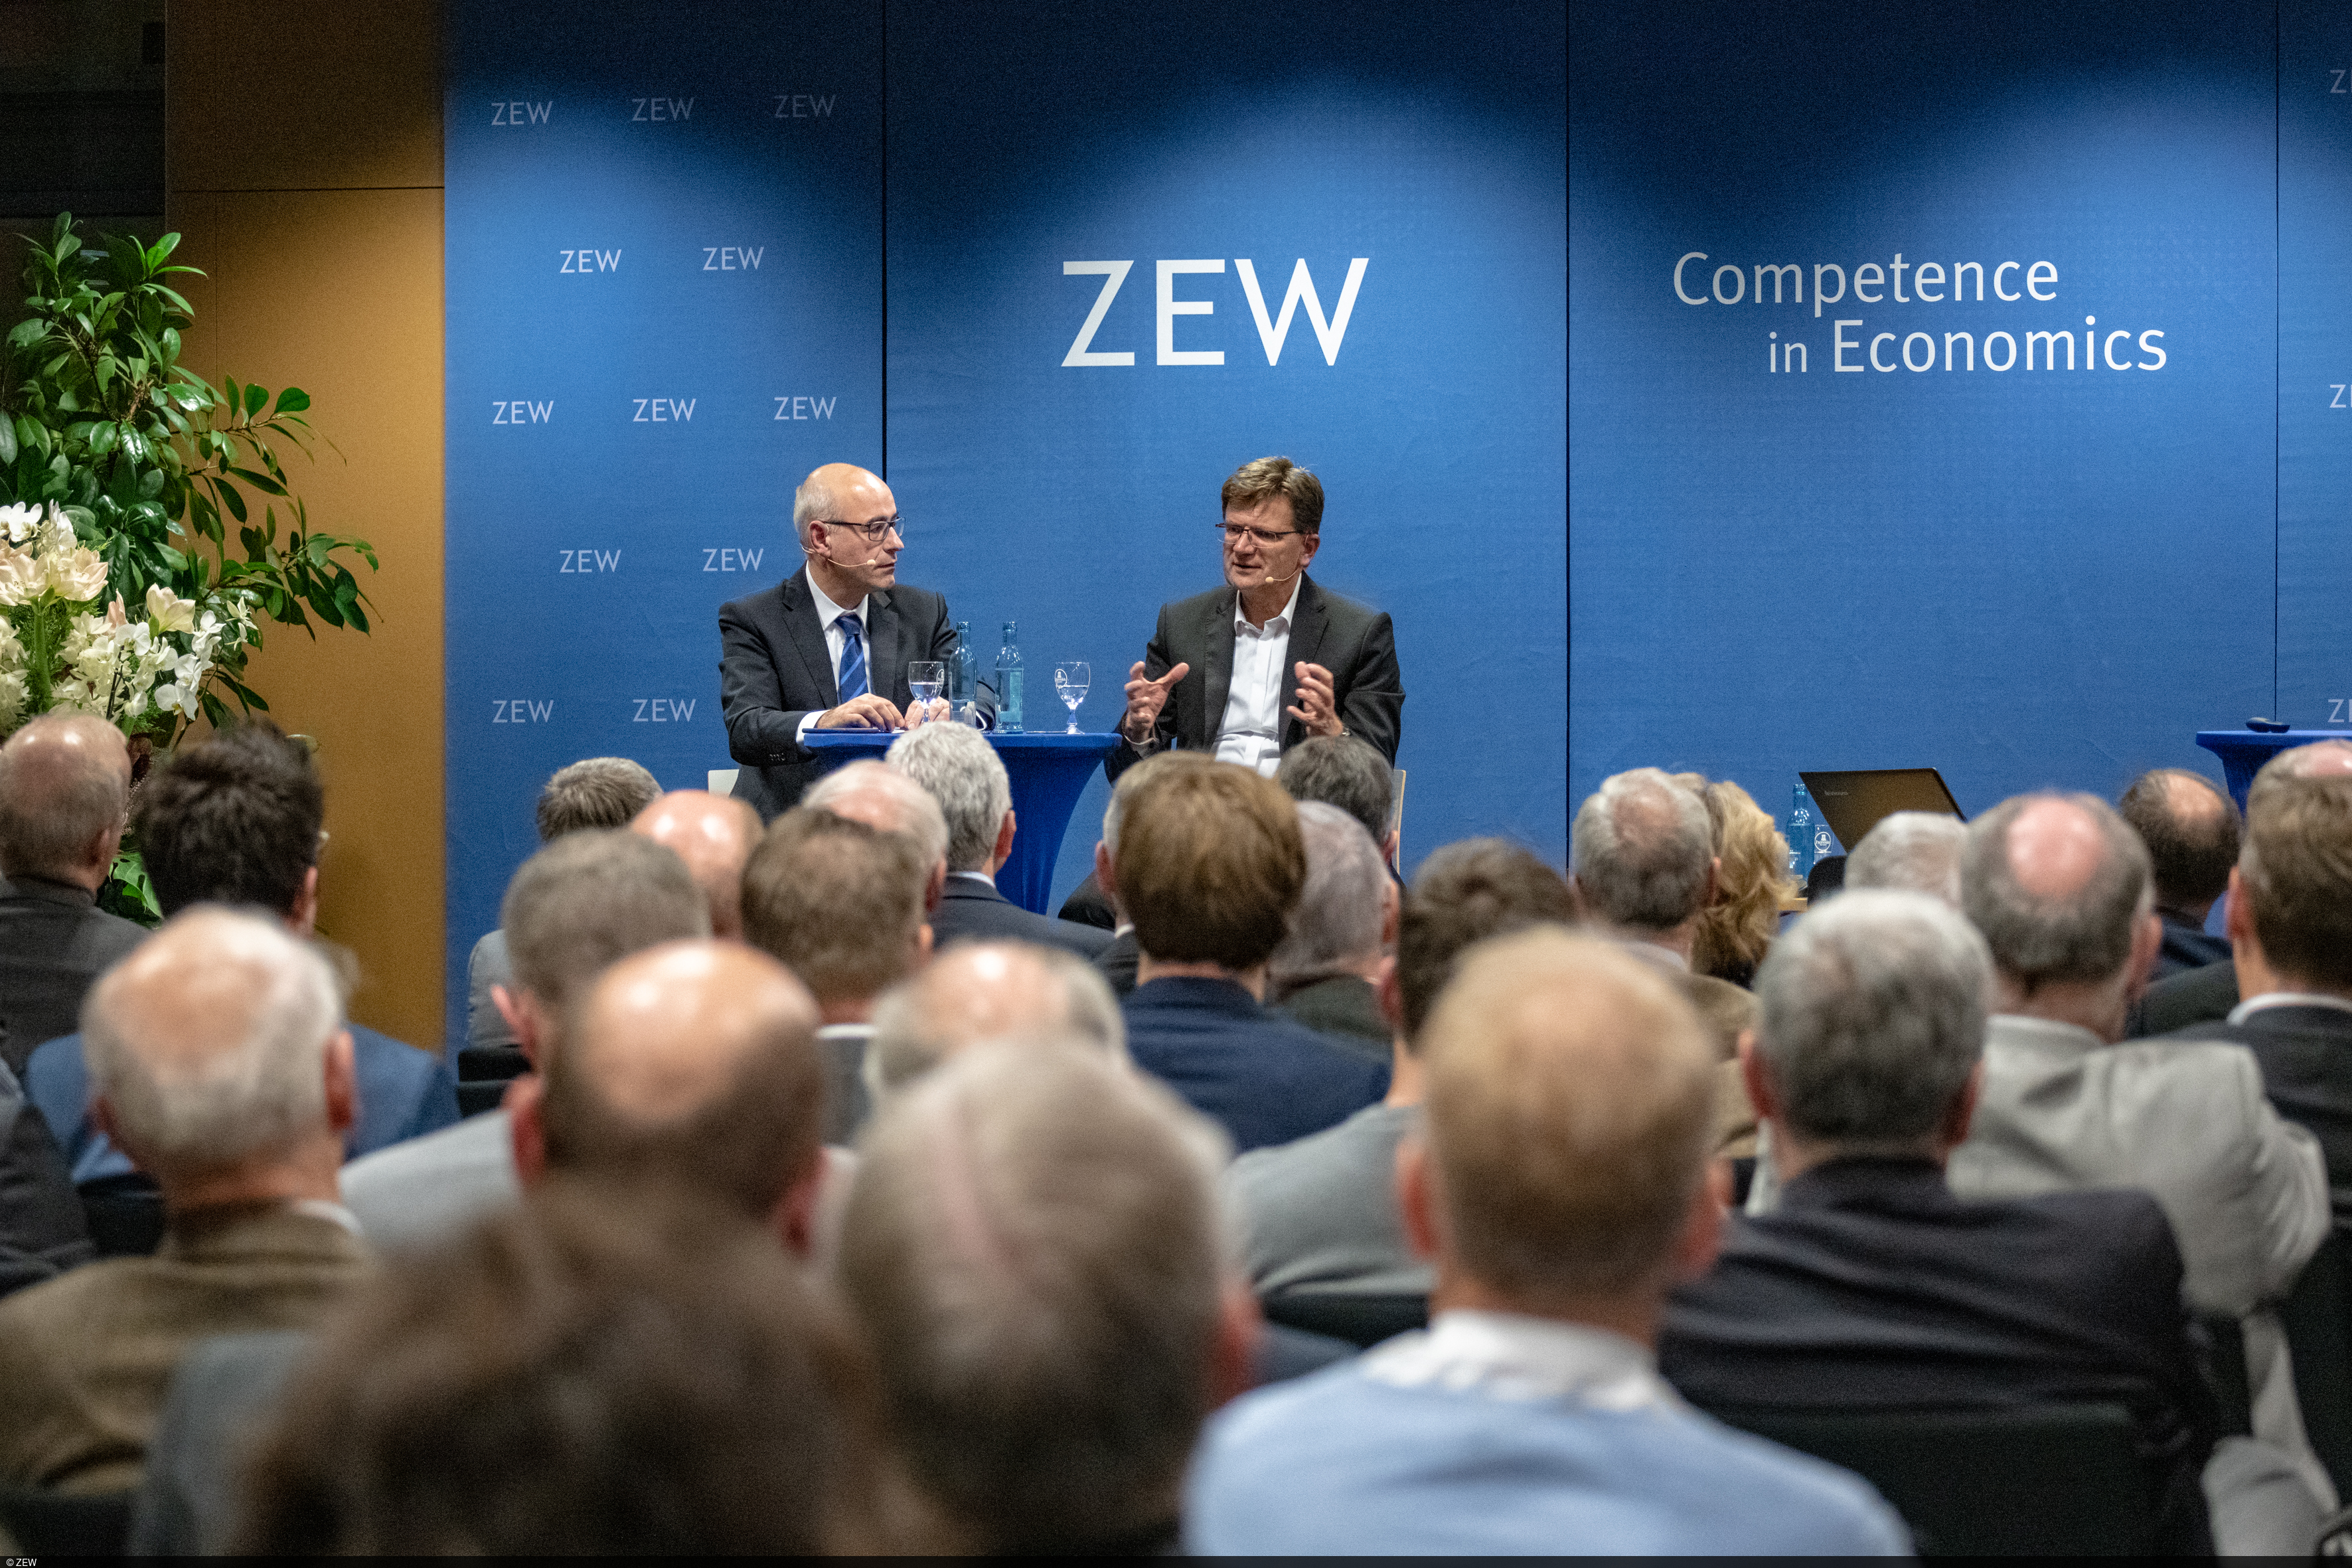 ZEW president Achim Wambach and Klaus Fröhlich during the discussion with the audience